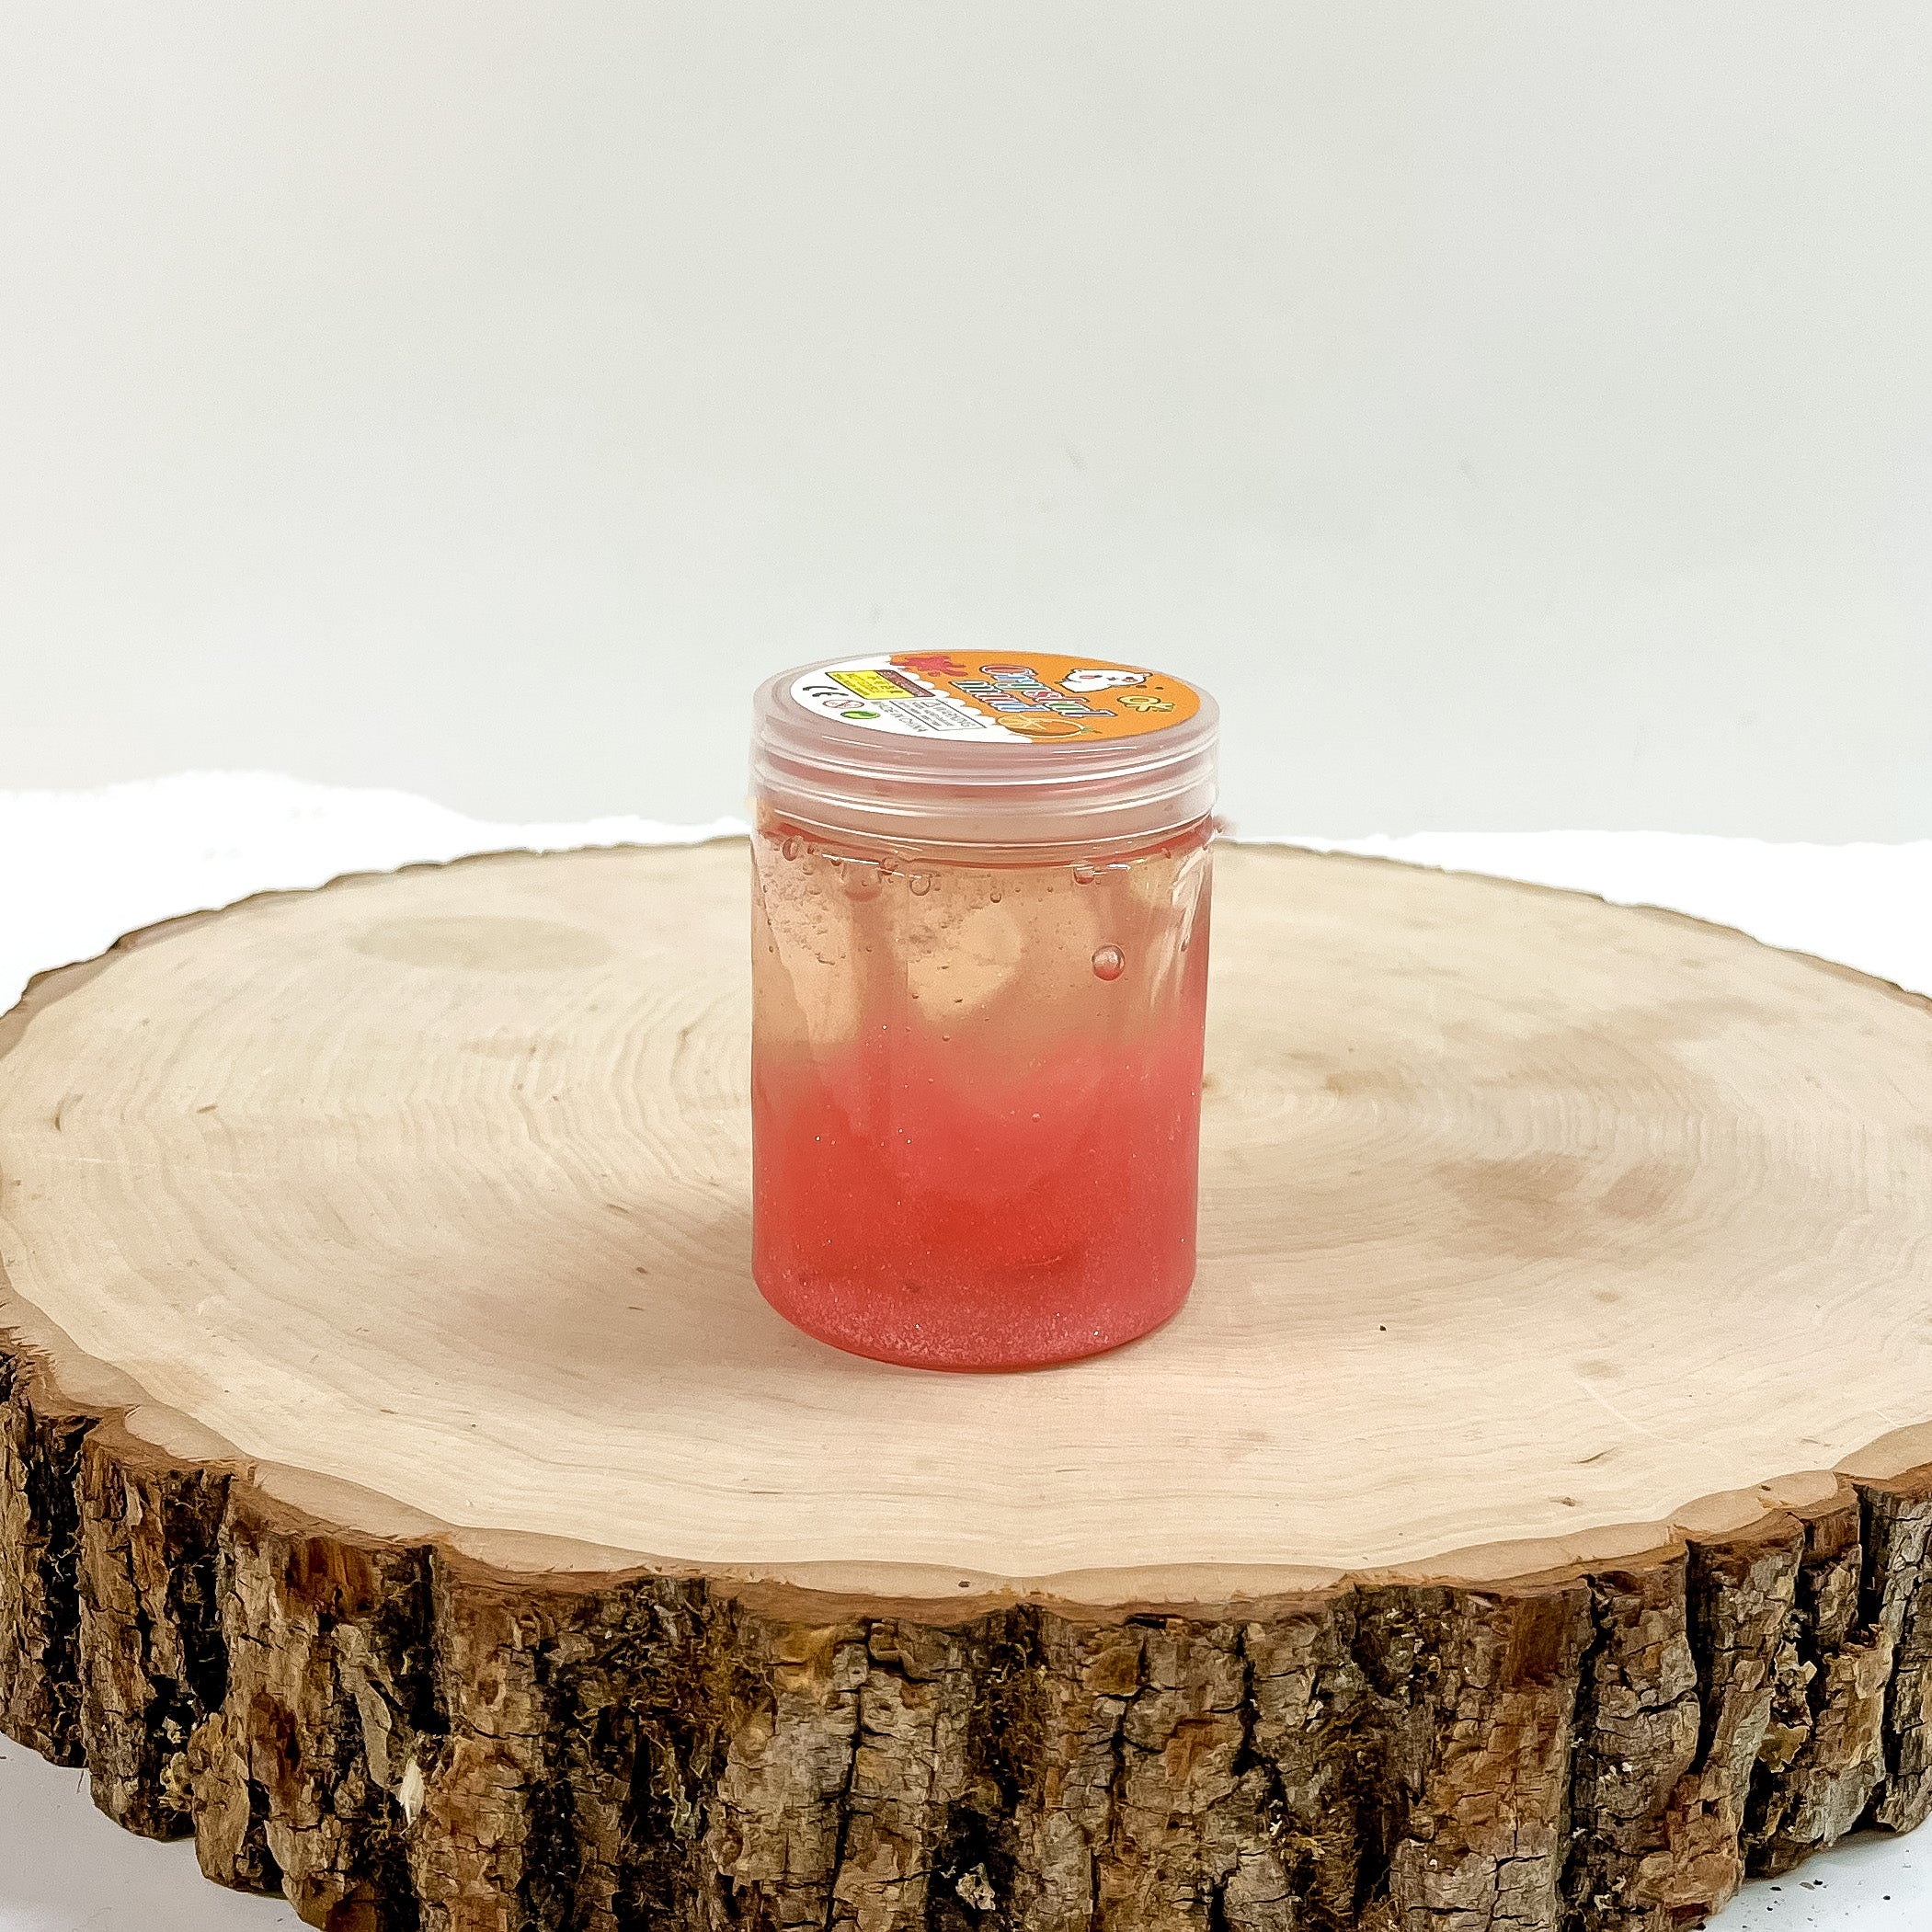 This is a clear slime with coral glitter, this container is taken on a slab of  wood and on a white background.